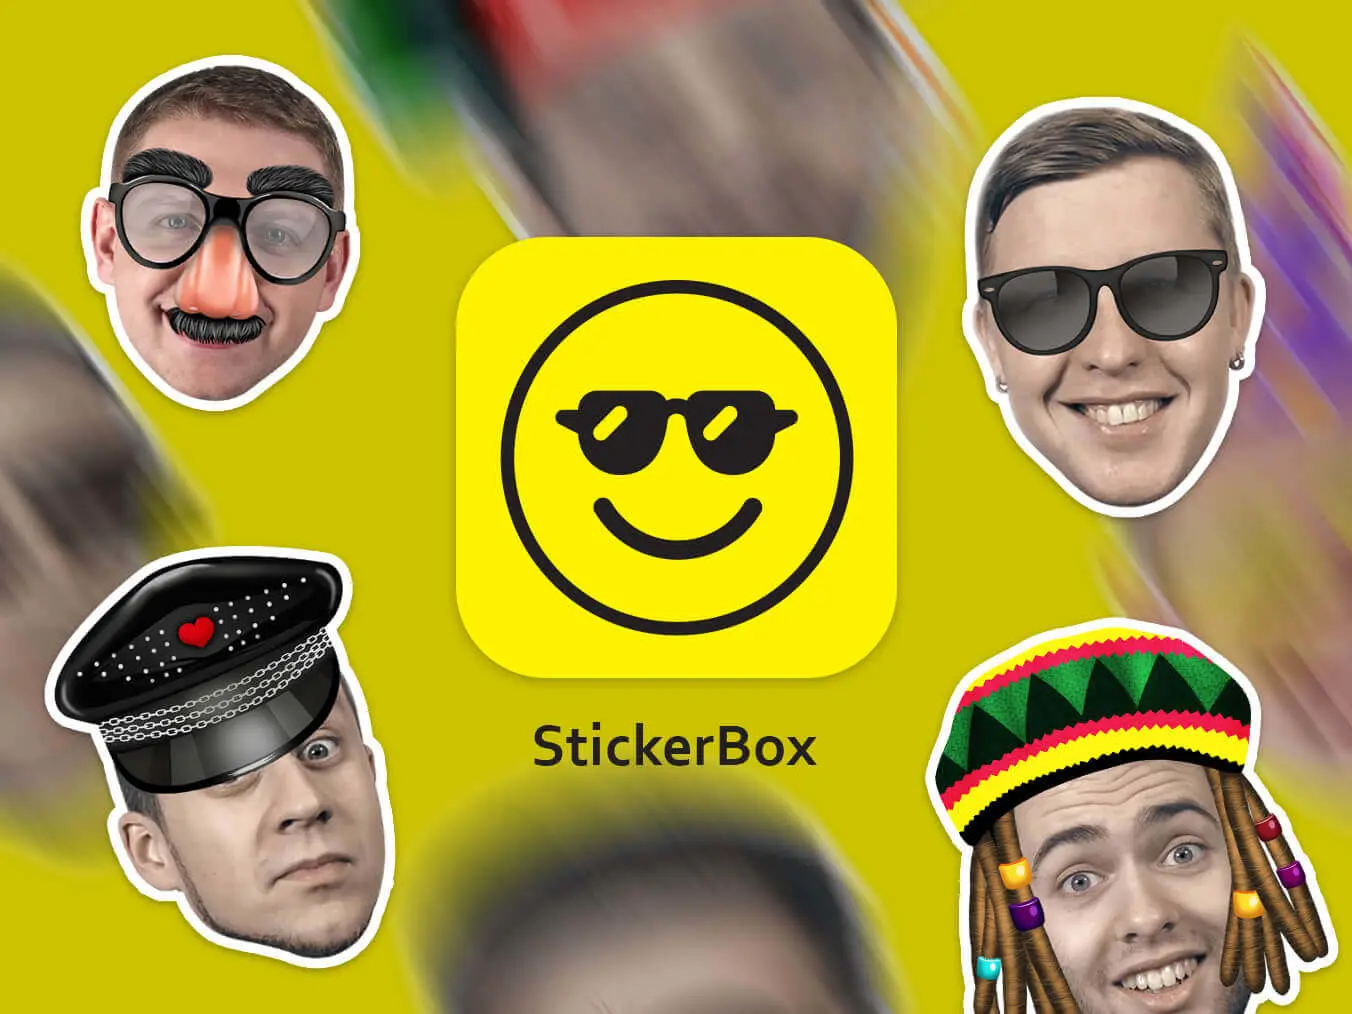 stickerbox-episode-1-why-we-failed-when-we-tried-to-segment-faces-with-algorithms